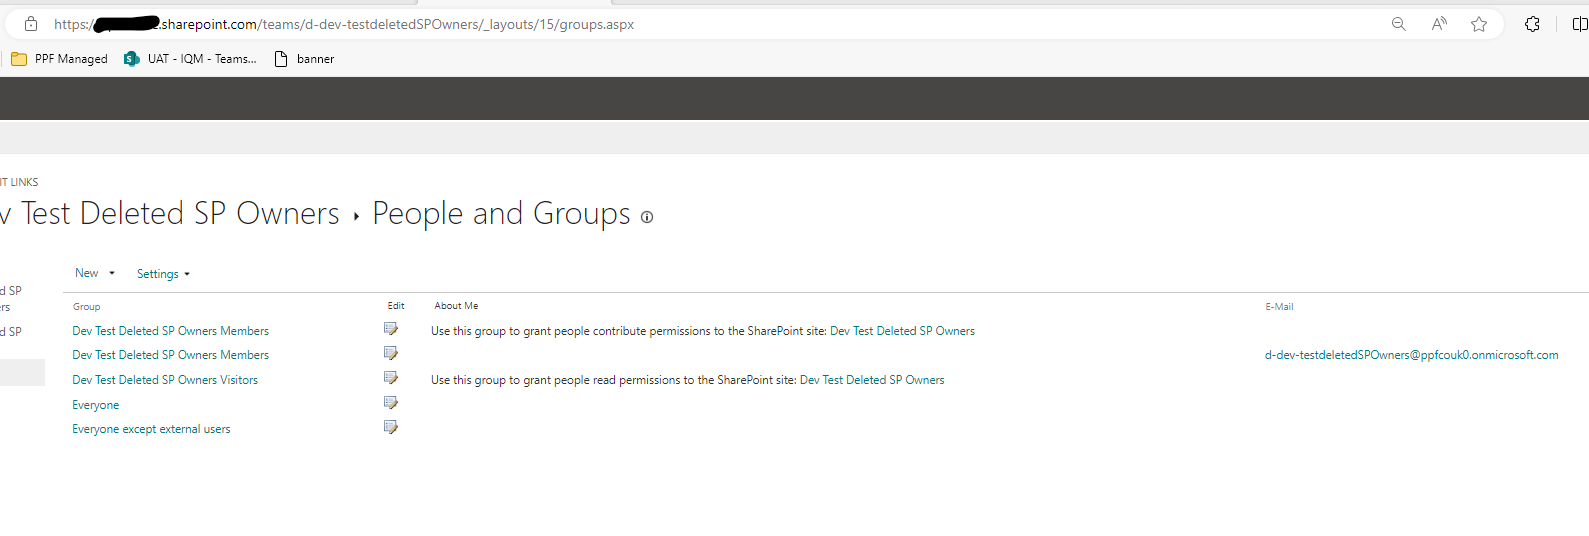 image from Recreating Deleted Owners Group for M365-Connected SharePoint Sites